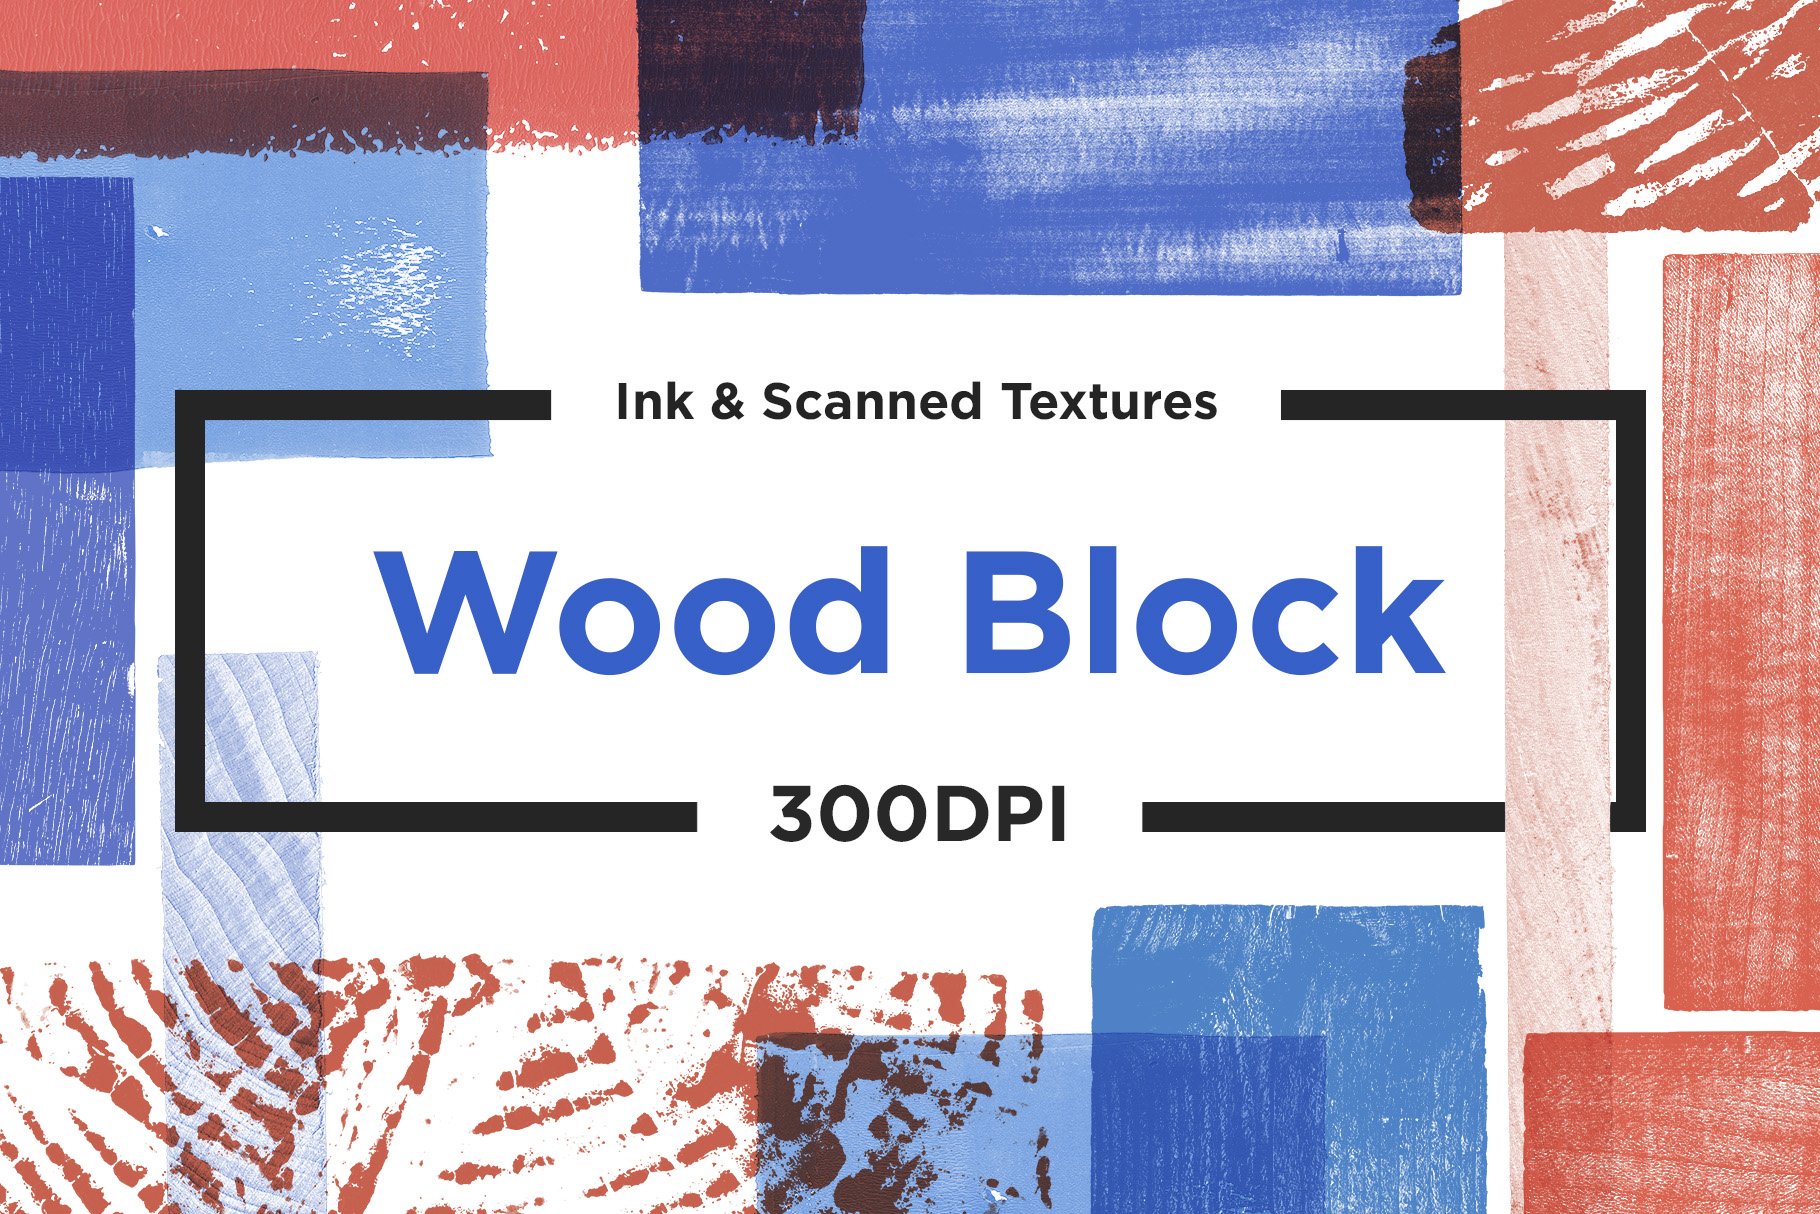 Wood Block Textures cover image.